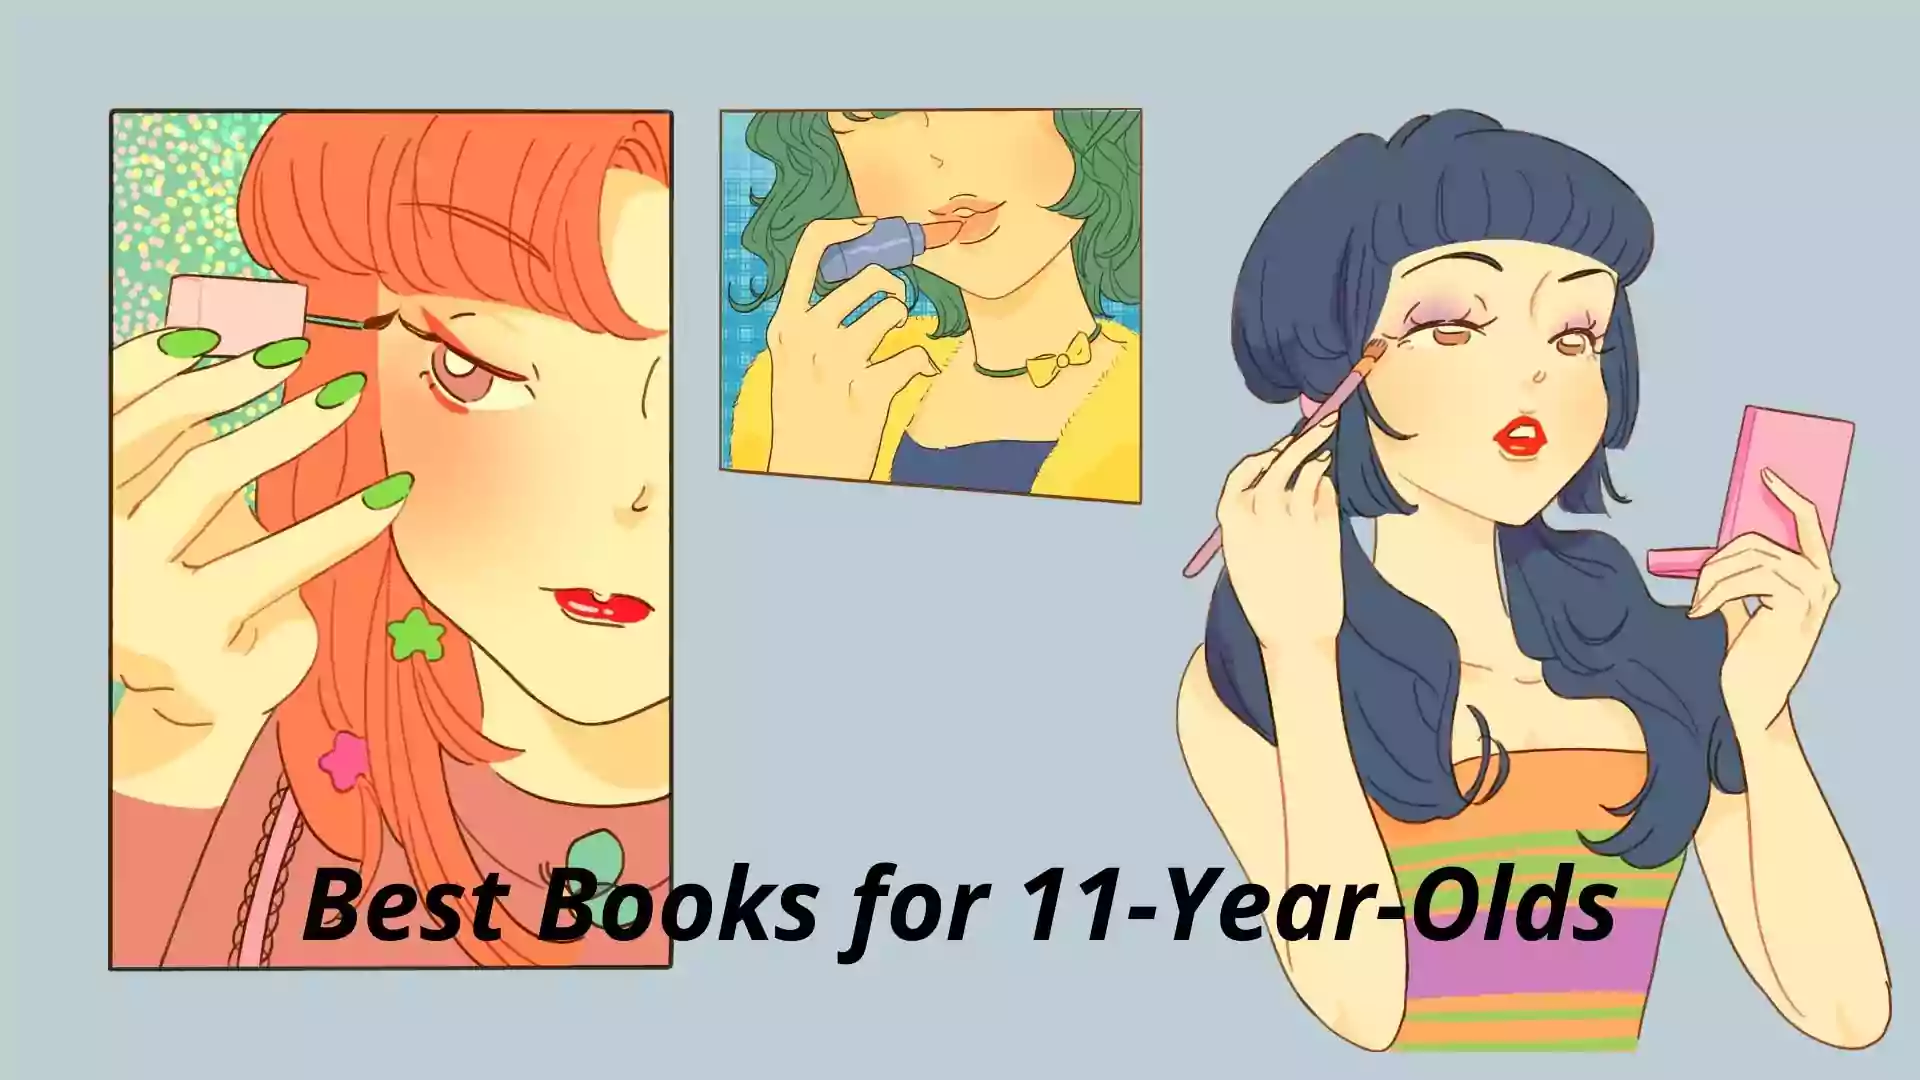 Best Books for 11-Year-Olds